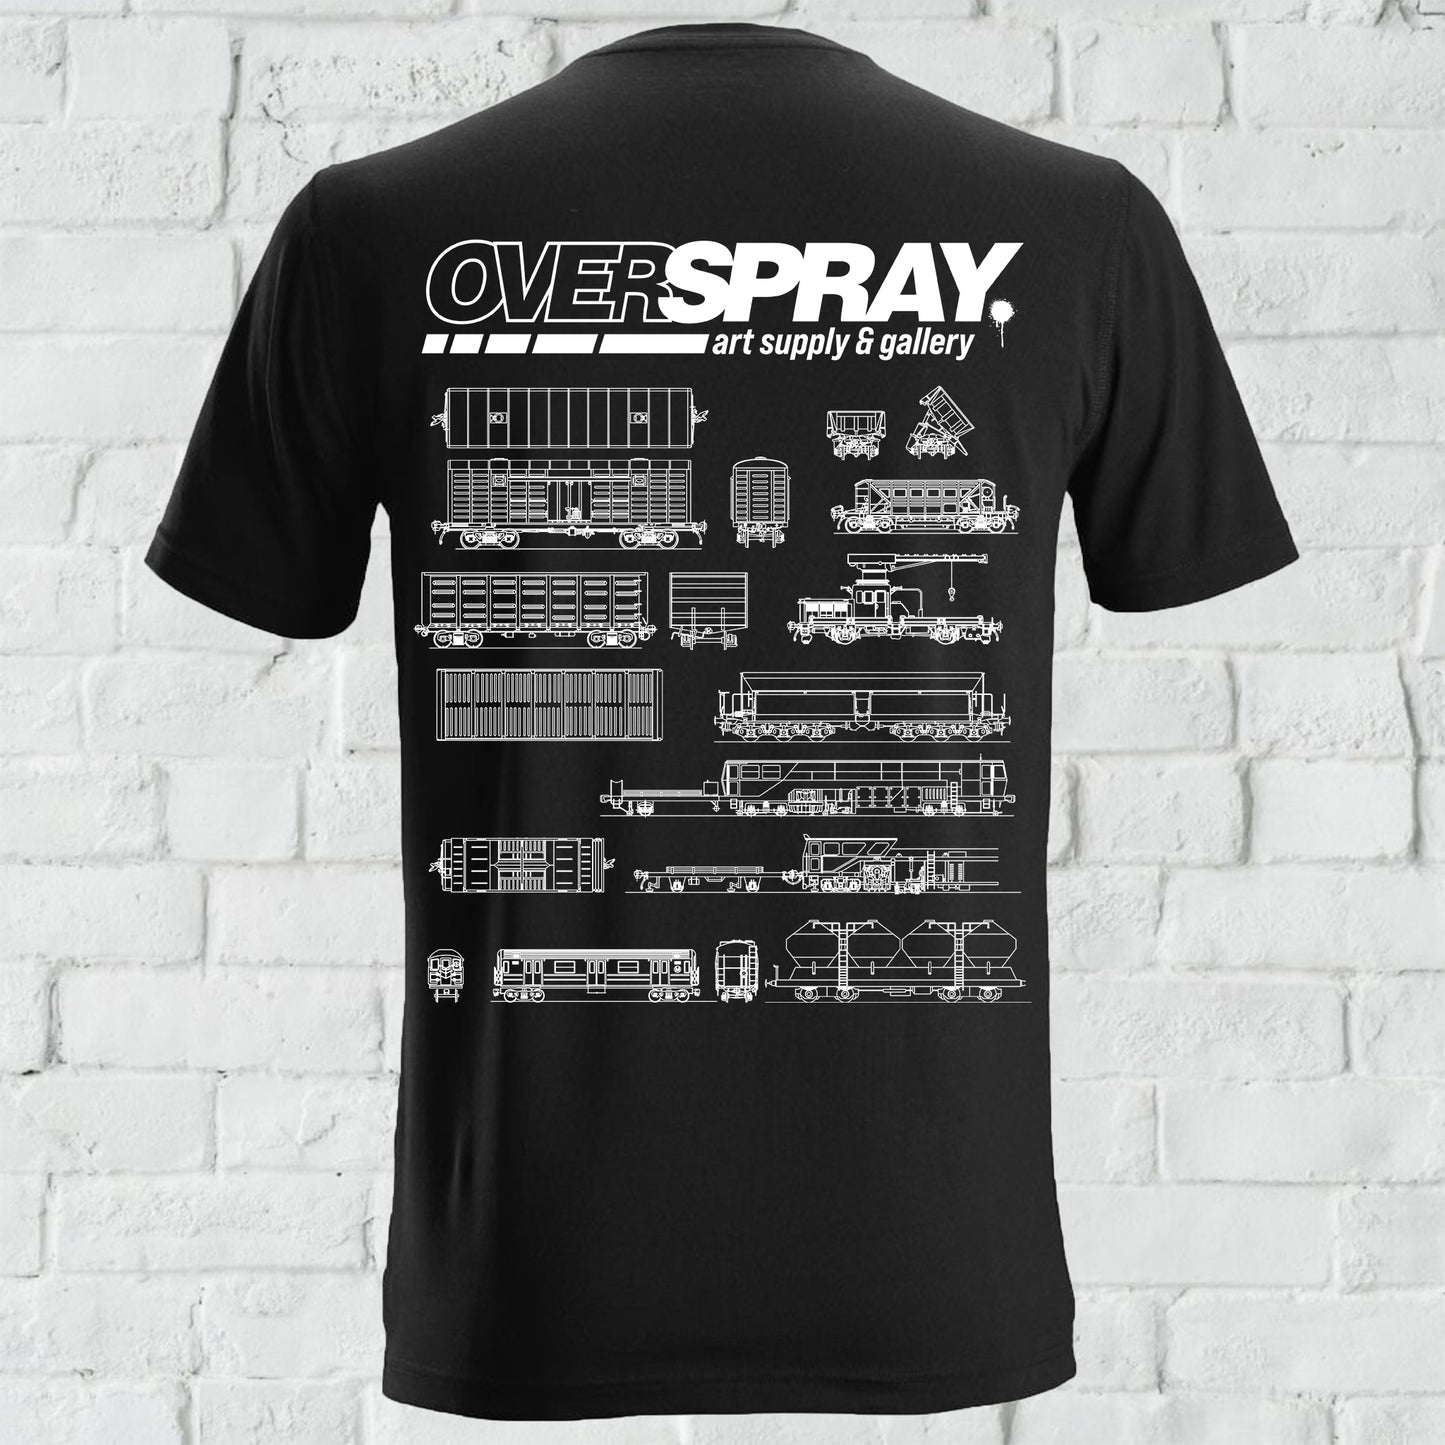 The back of a black shirt with "overspray" and train illustrations in white print